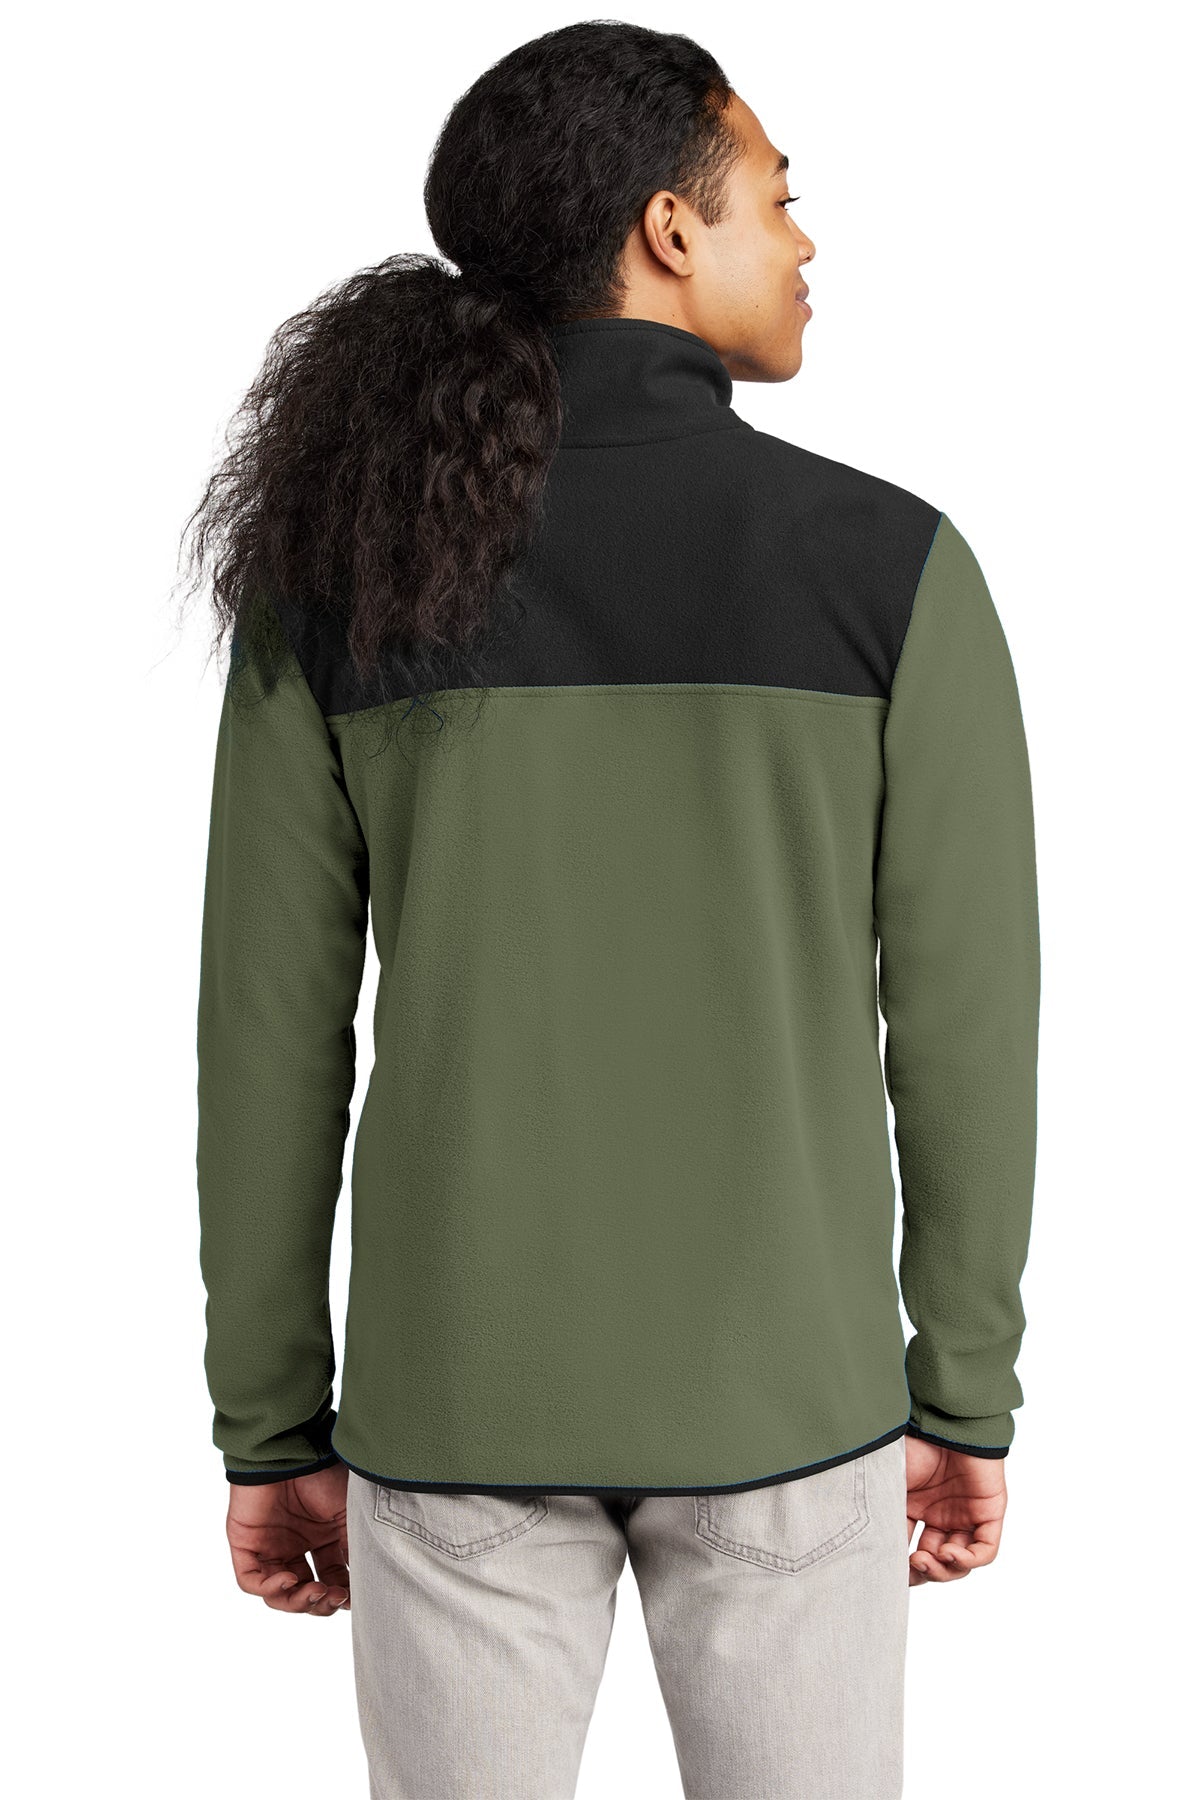 The North Face Glacier Custom Fleece 1/4 Zips, New Taupe Green